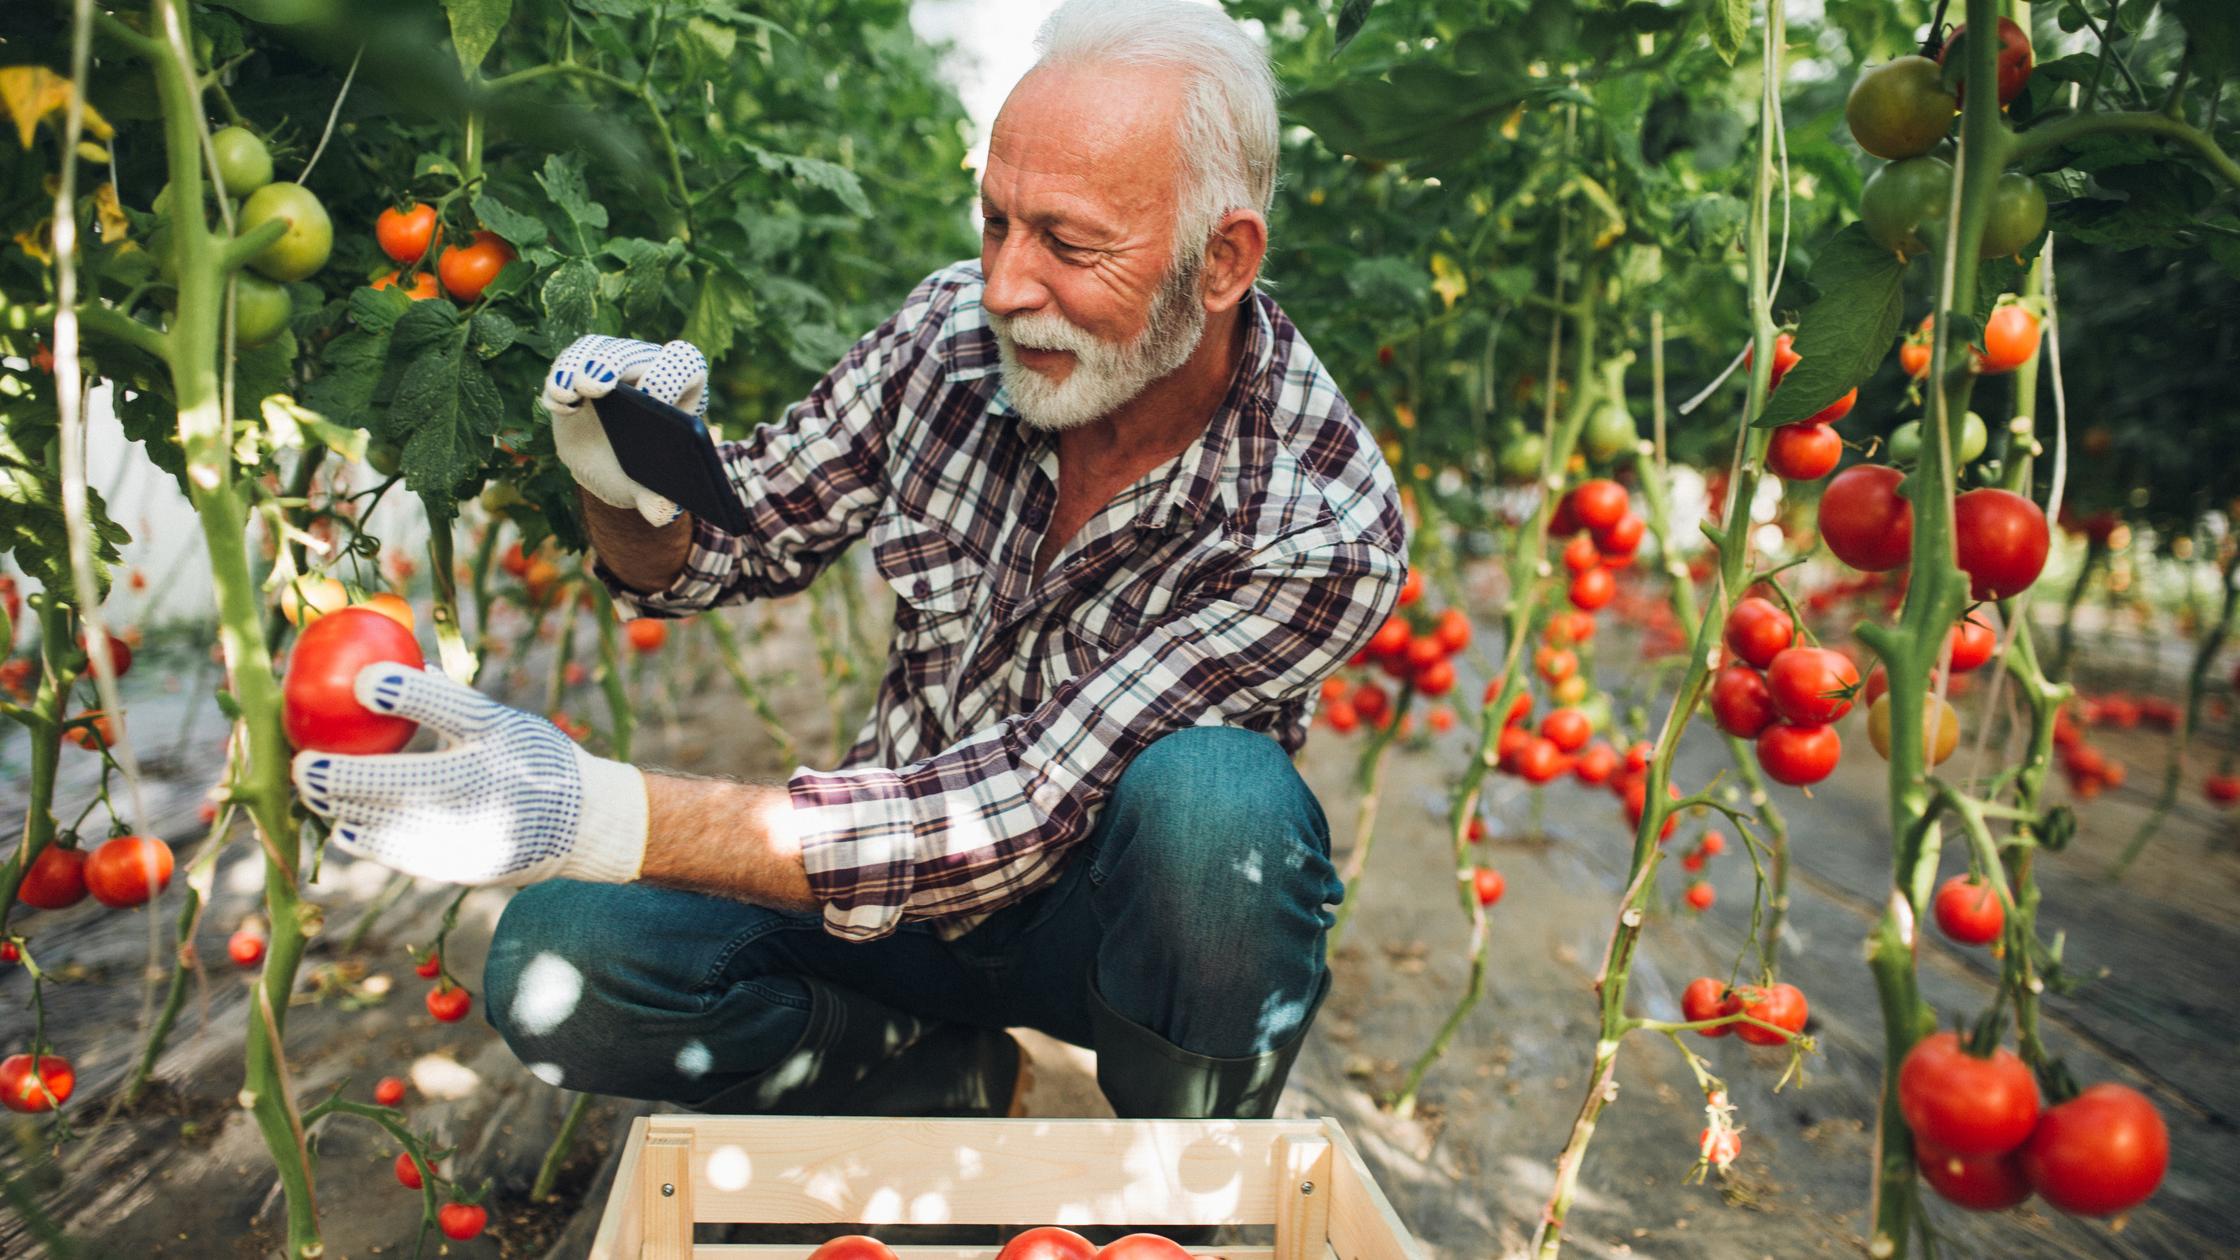 Man photographing tomato in garden